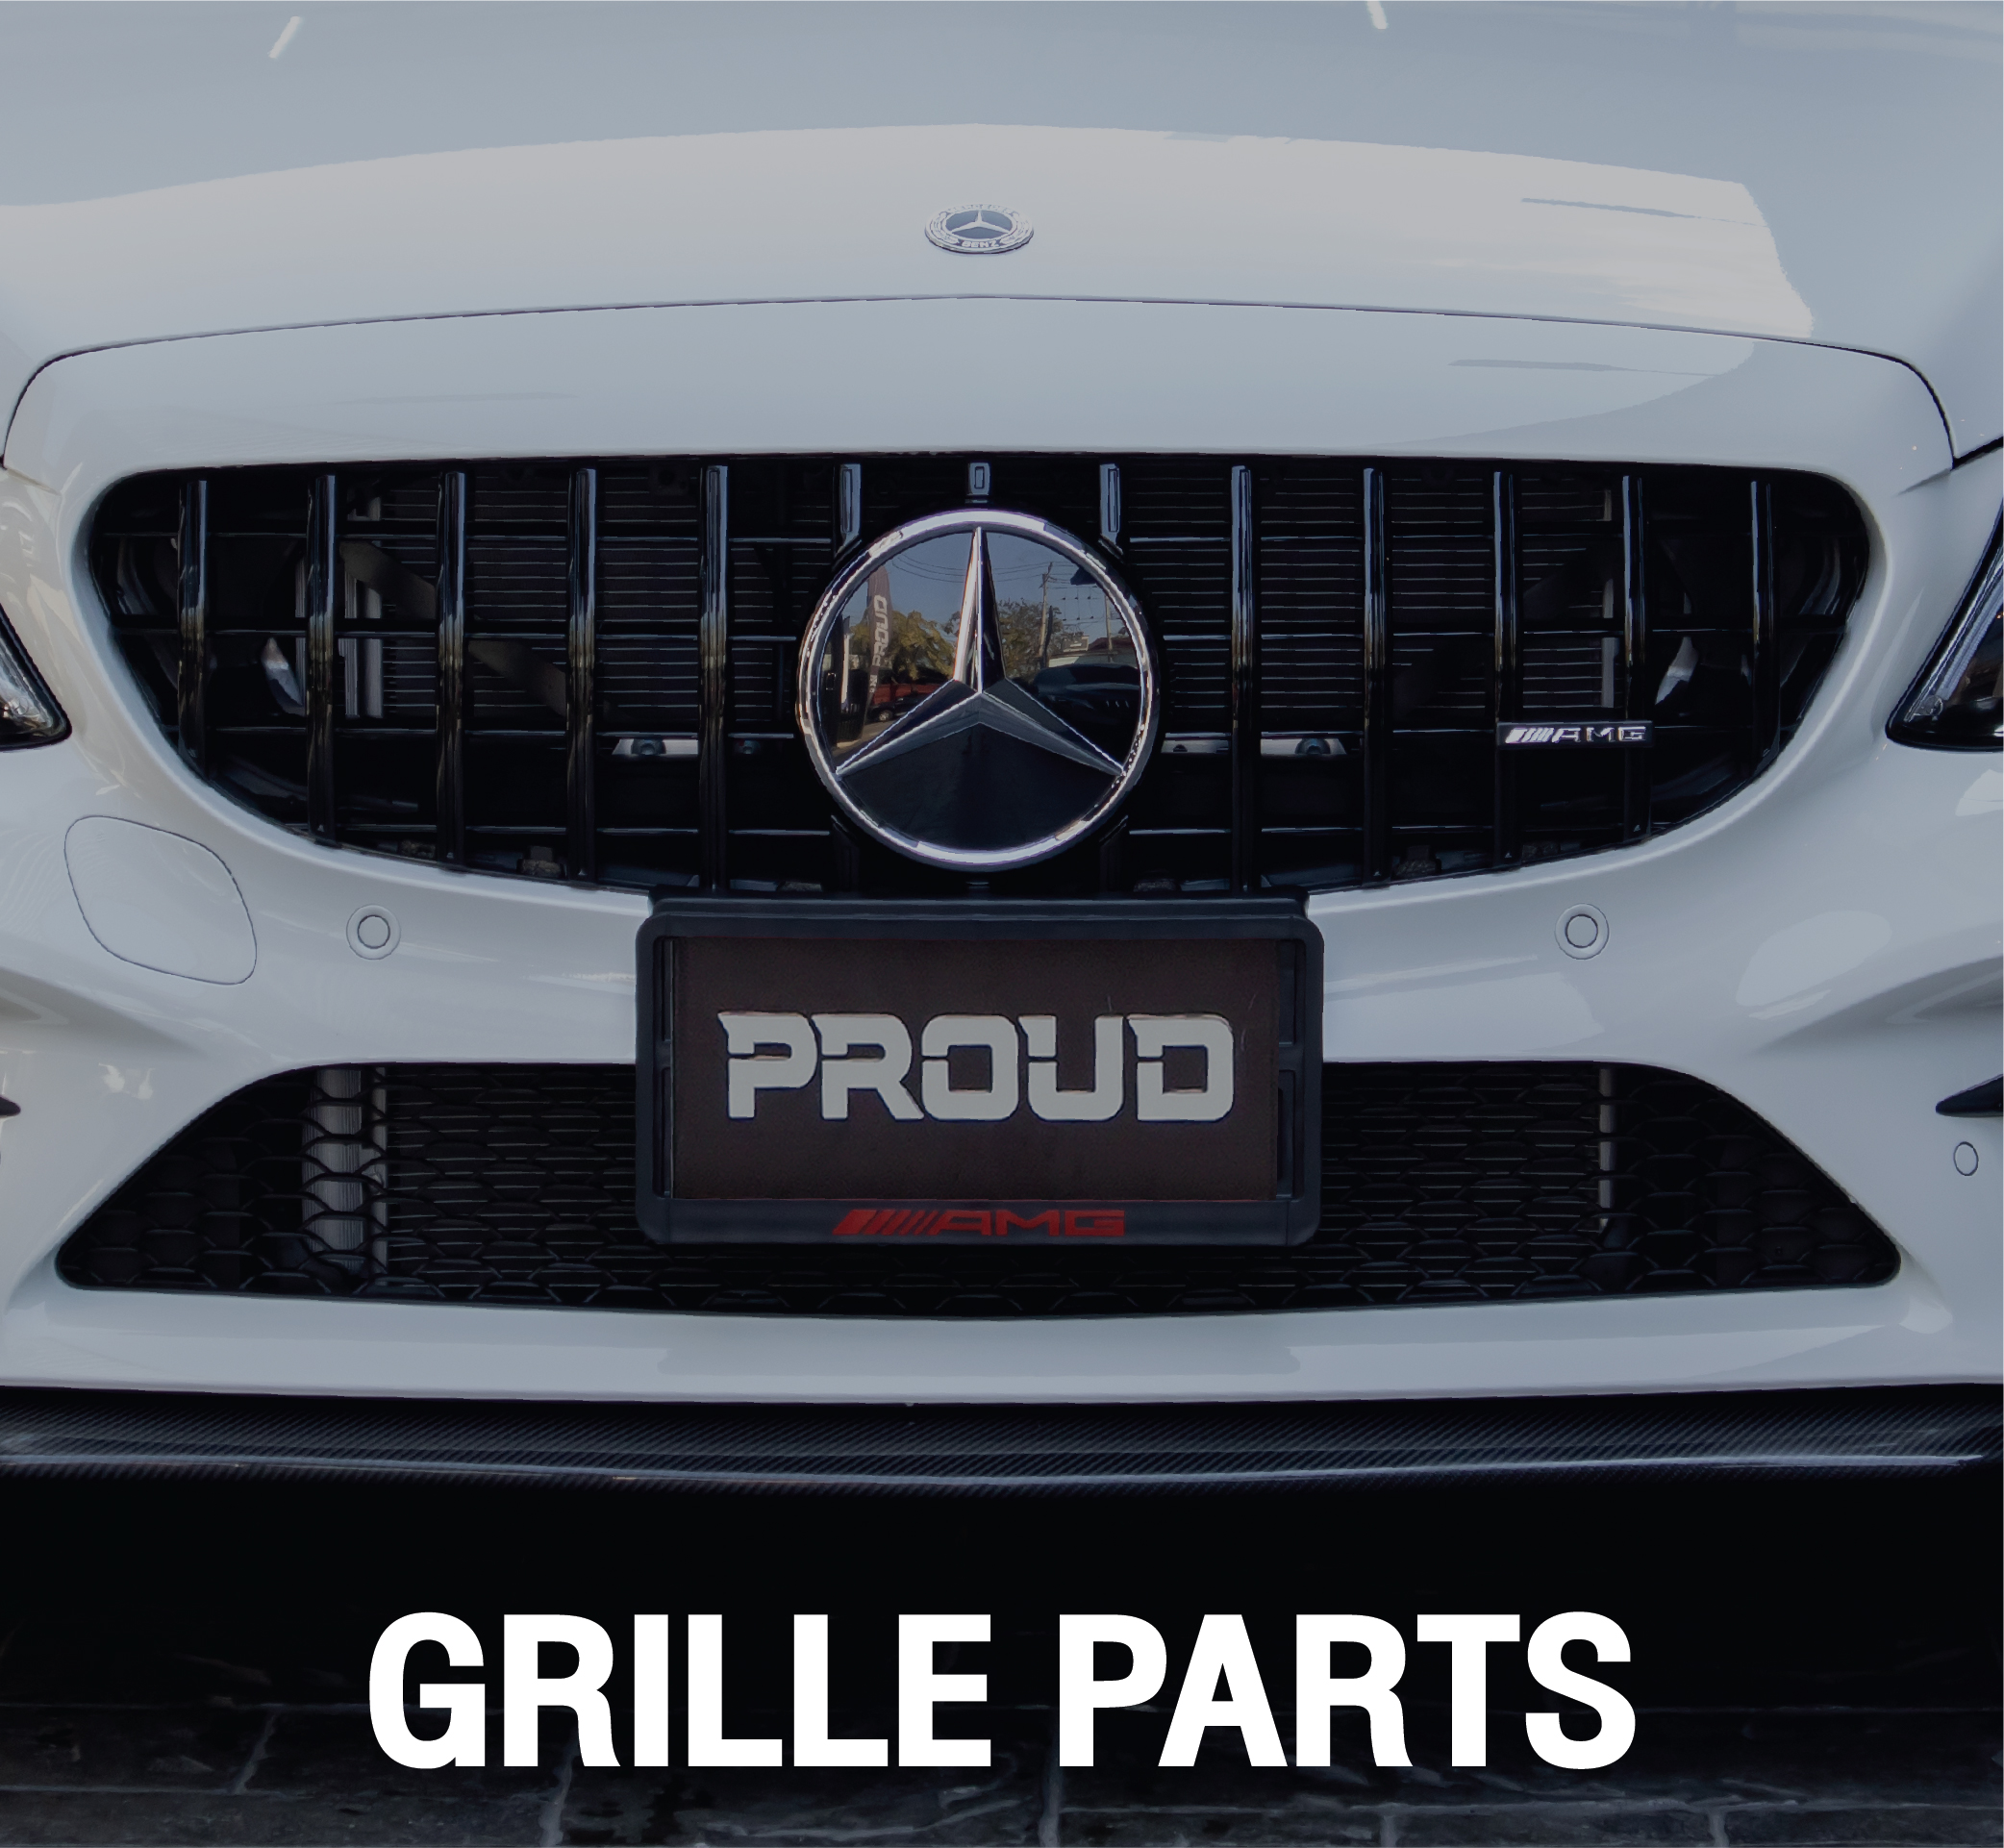 GRILLE PARTS - กระจังหน้า